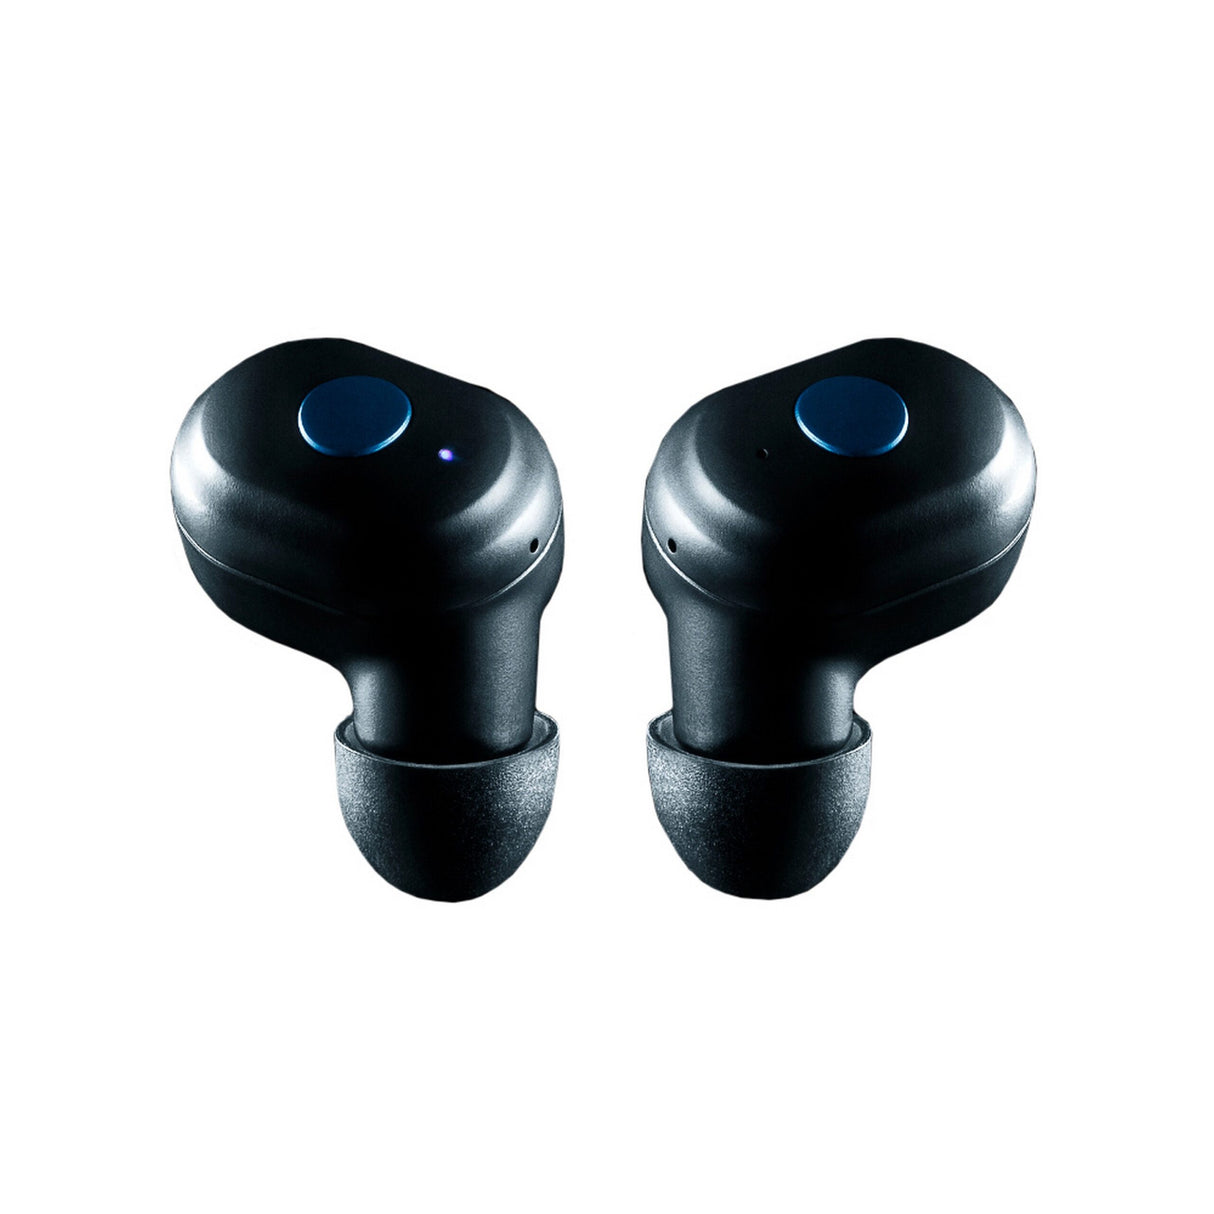 Electro-Harmonix EHX R&B Wireless Earbuds with 5 Hours of Playtime